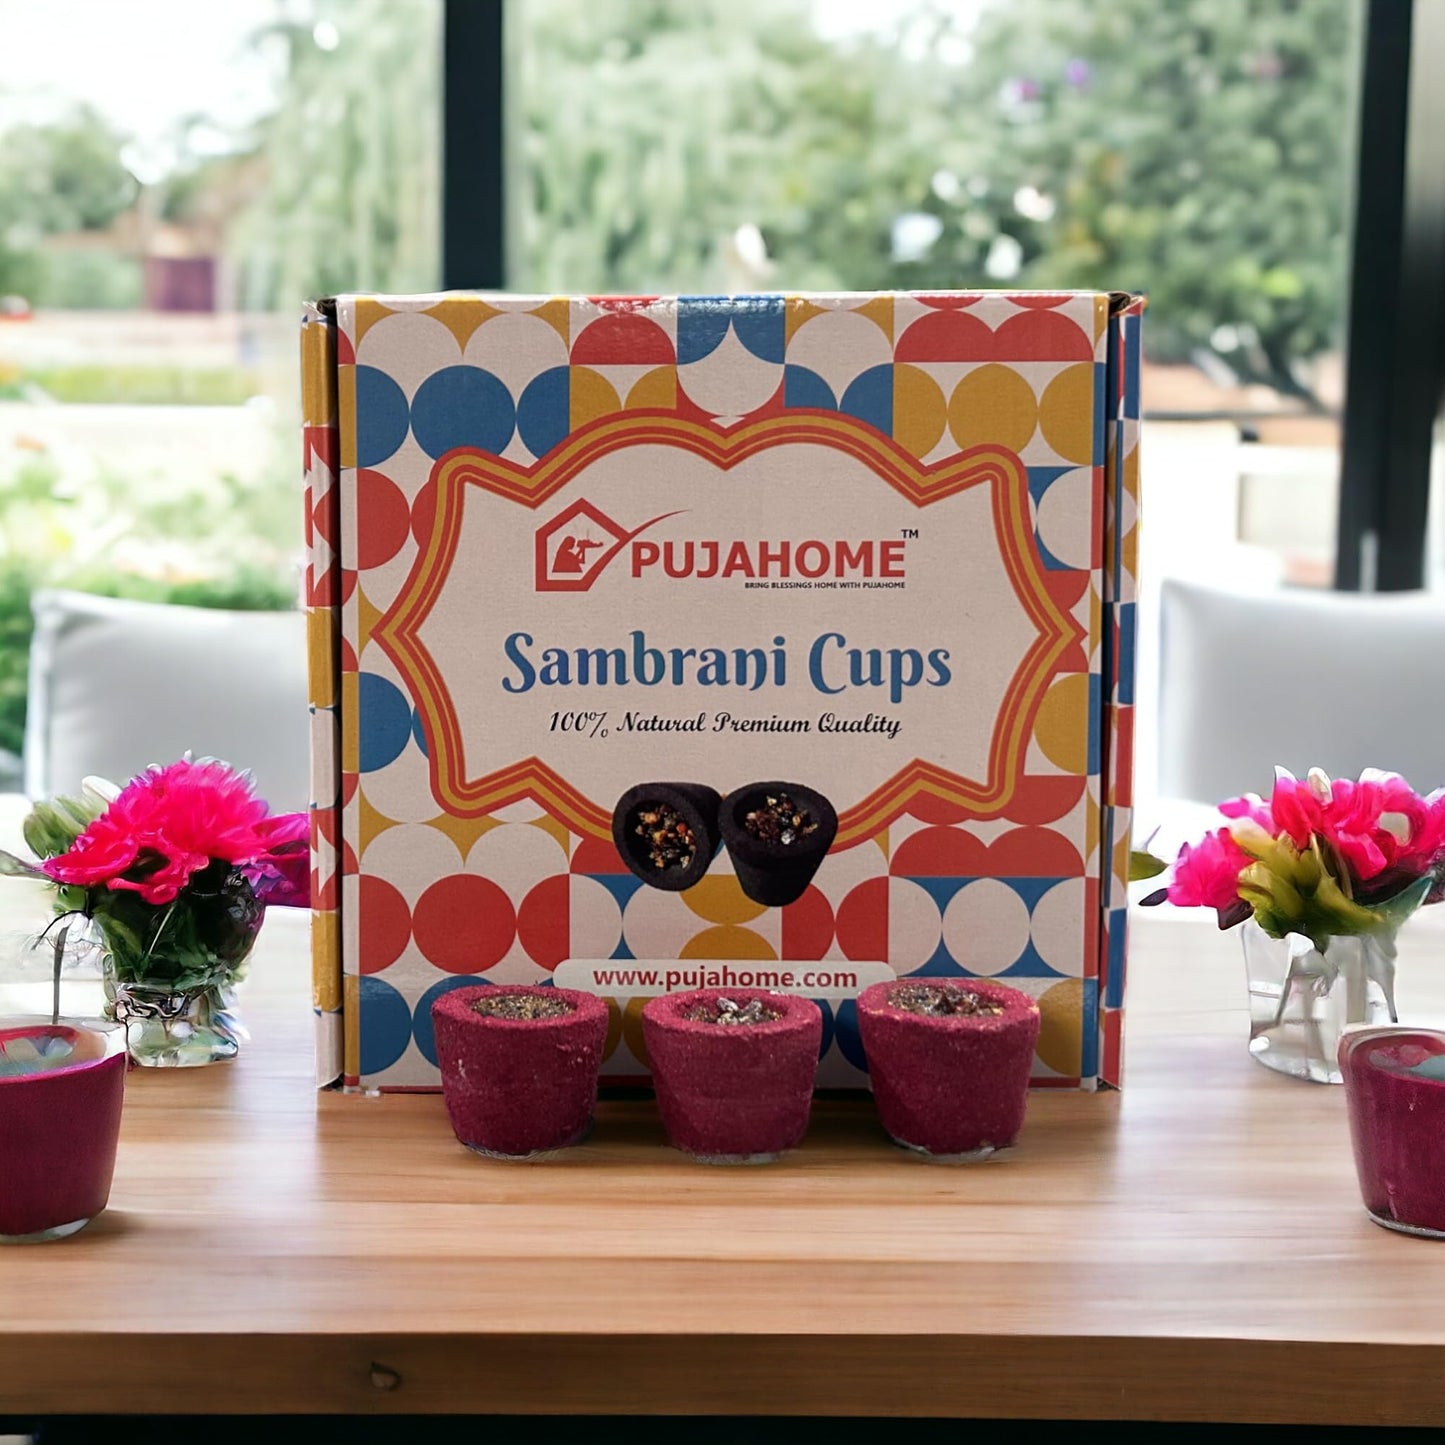 Pujahome Natural Rose Fragrance Sambrani Cups for Puja/Home (12 Cups Per Pack + Free Holder)